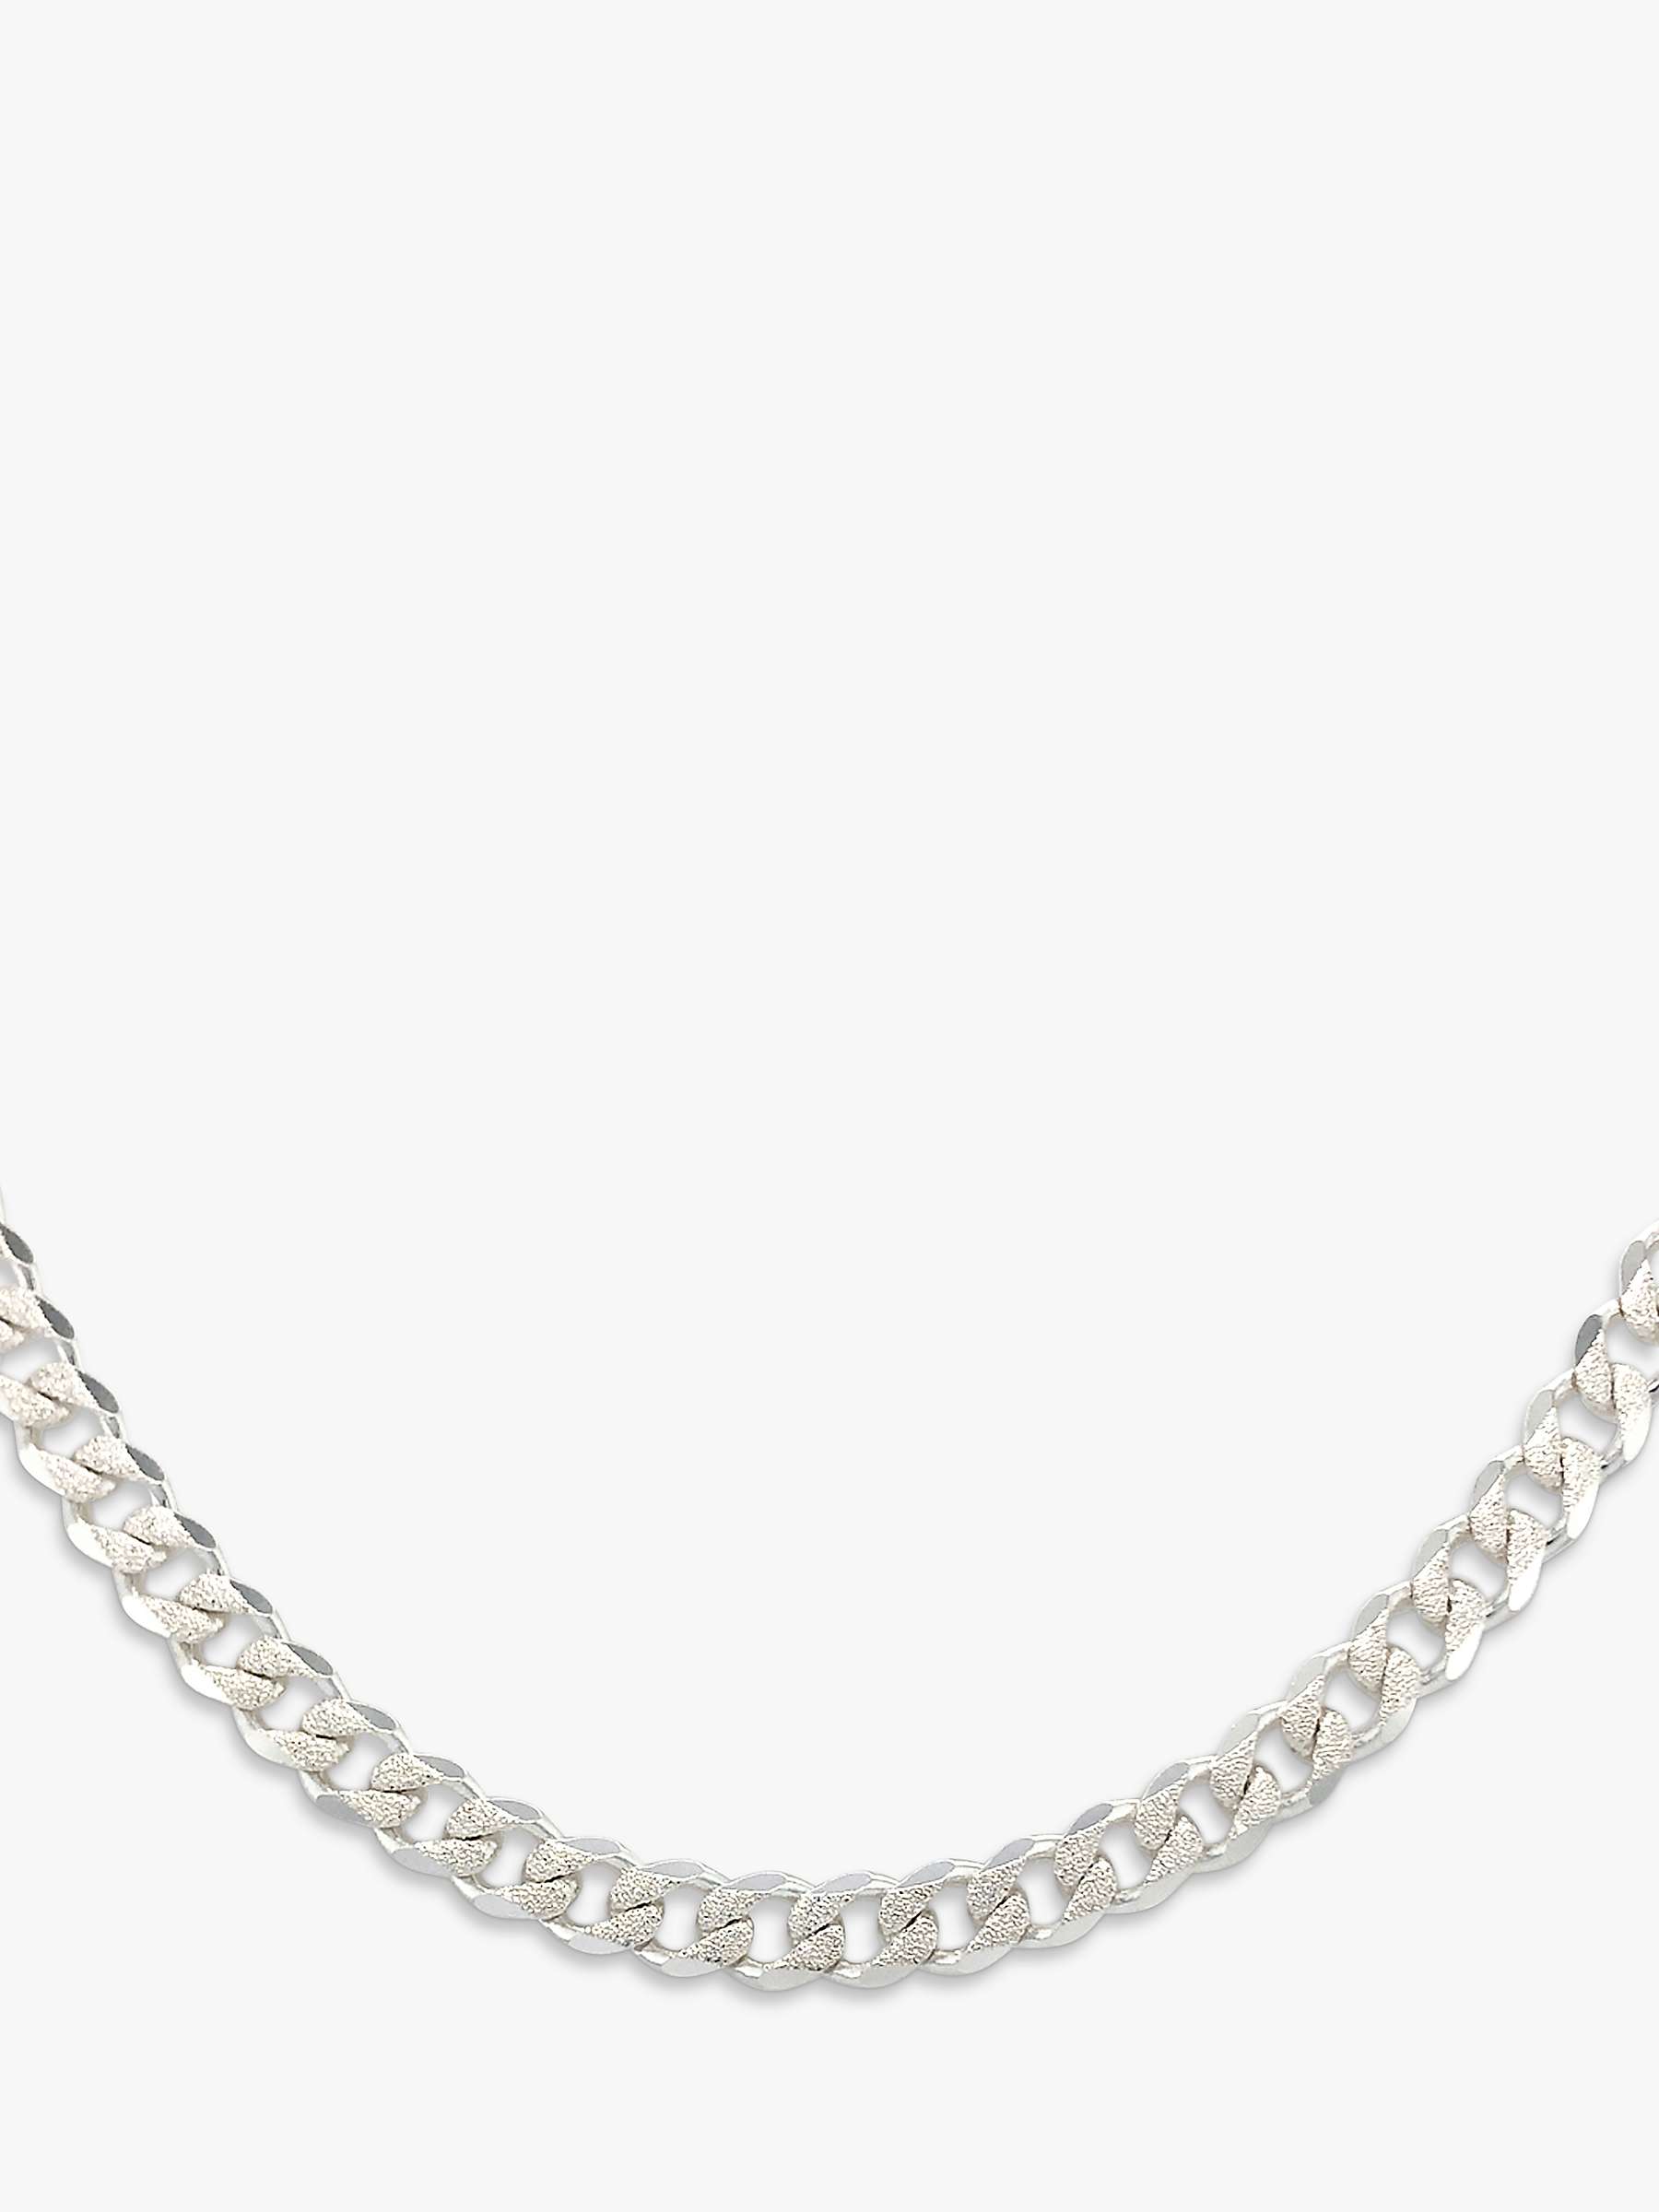 Buy Vintage Fine Jewellery Second Hand Textured Curb Link Chain Necklace, Dated Circa 1980s Online at johnlewis.com